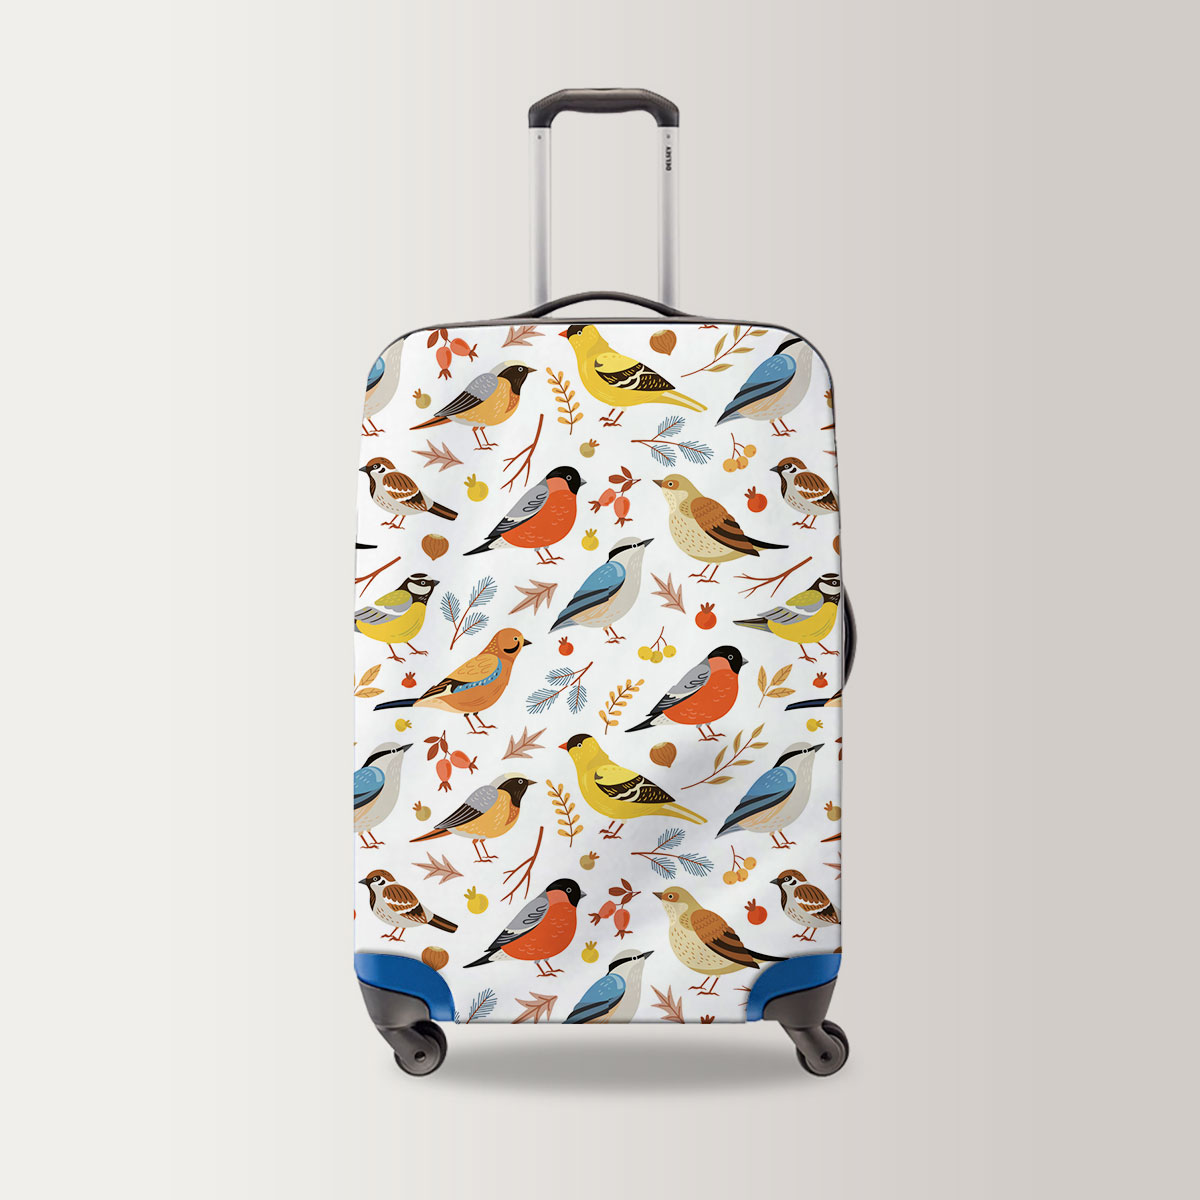 Coon Berries Finch Luggage Bag